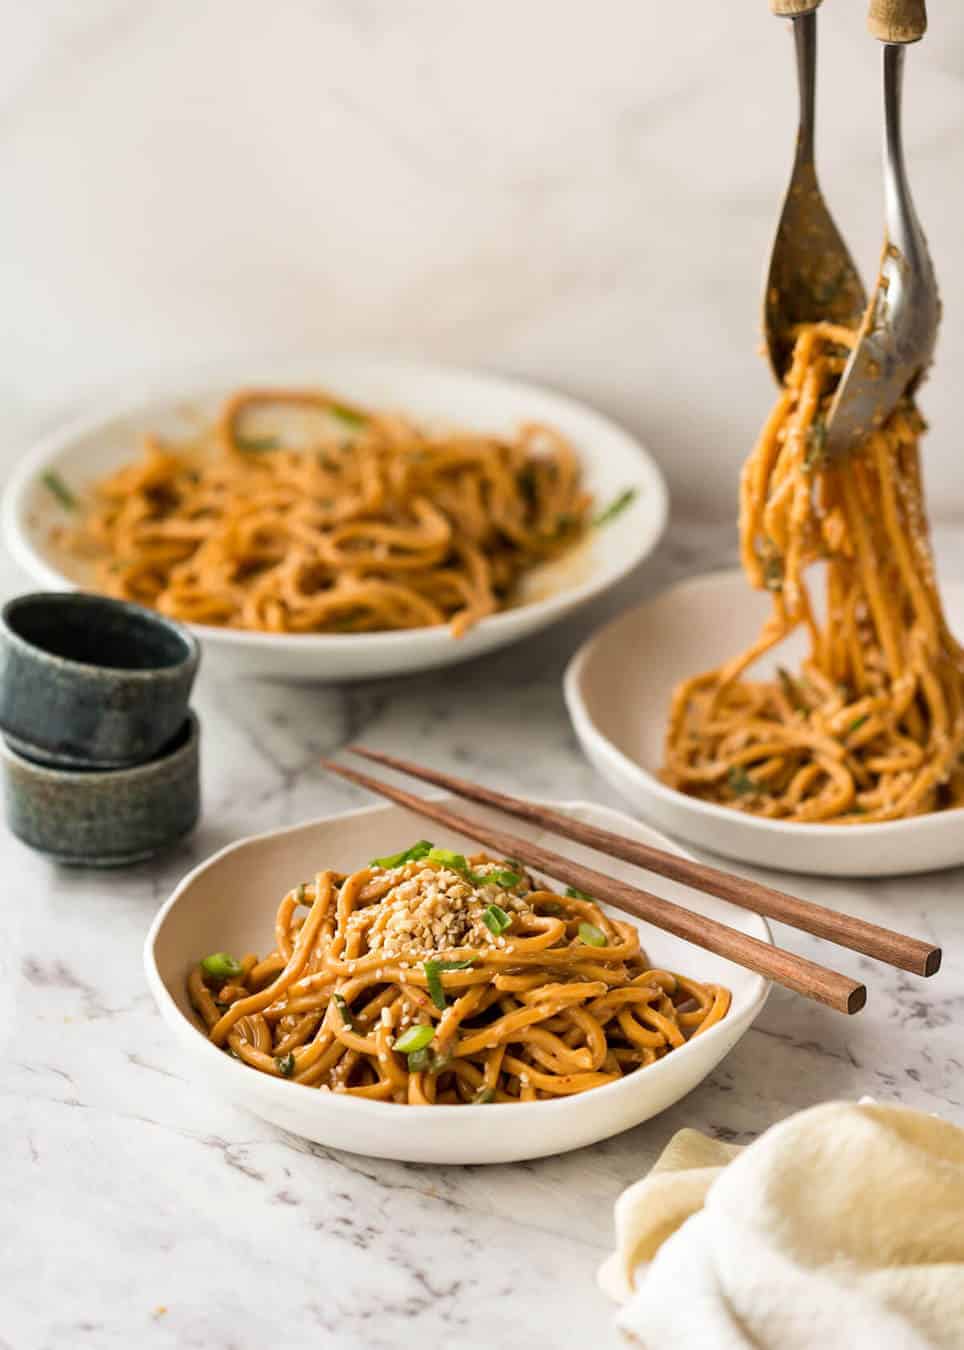 Sesame Noodles - noodles tossed with a wicked Asian Sesame Peanut Dressing. Serve these as Cold Sesame Noodles or warm. www.recipetineats.com